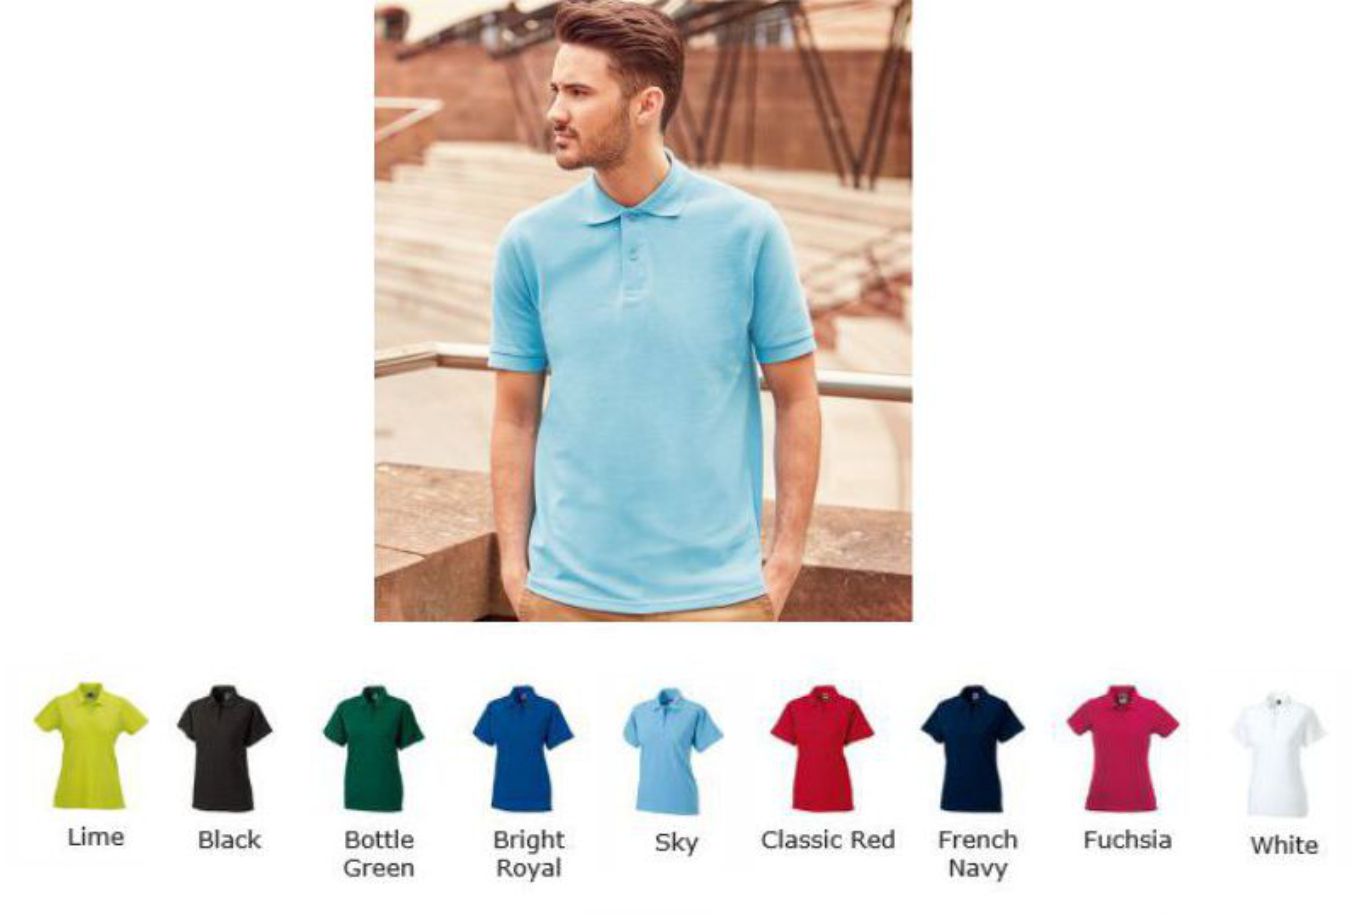 Russell's 569M 100% cotton Pique Polo Shirt